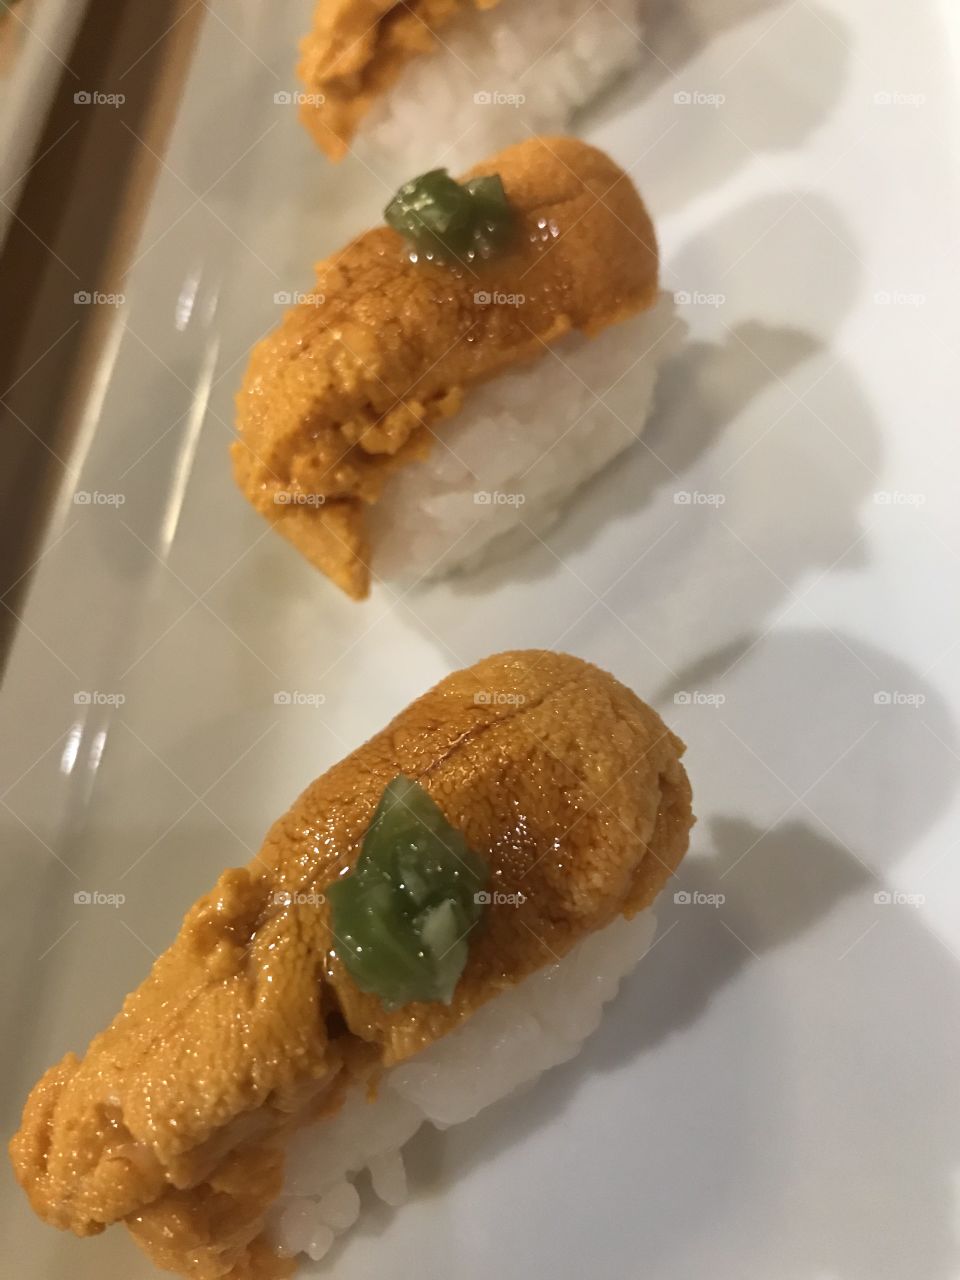 Uni sushi in Beverly Hills